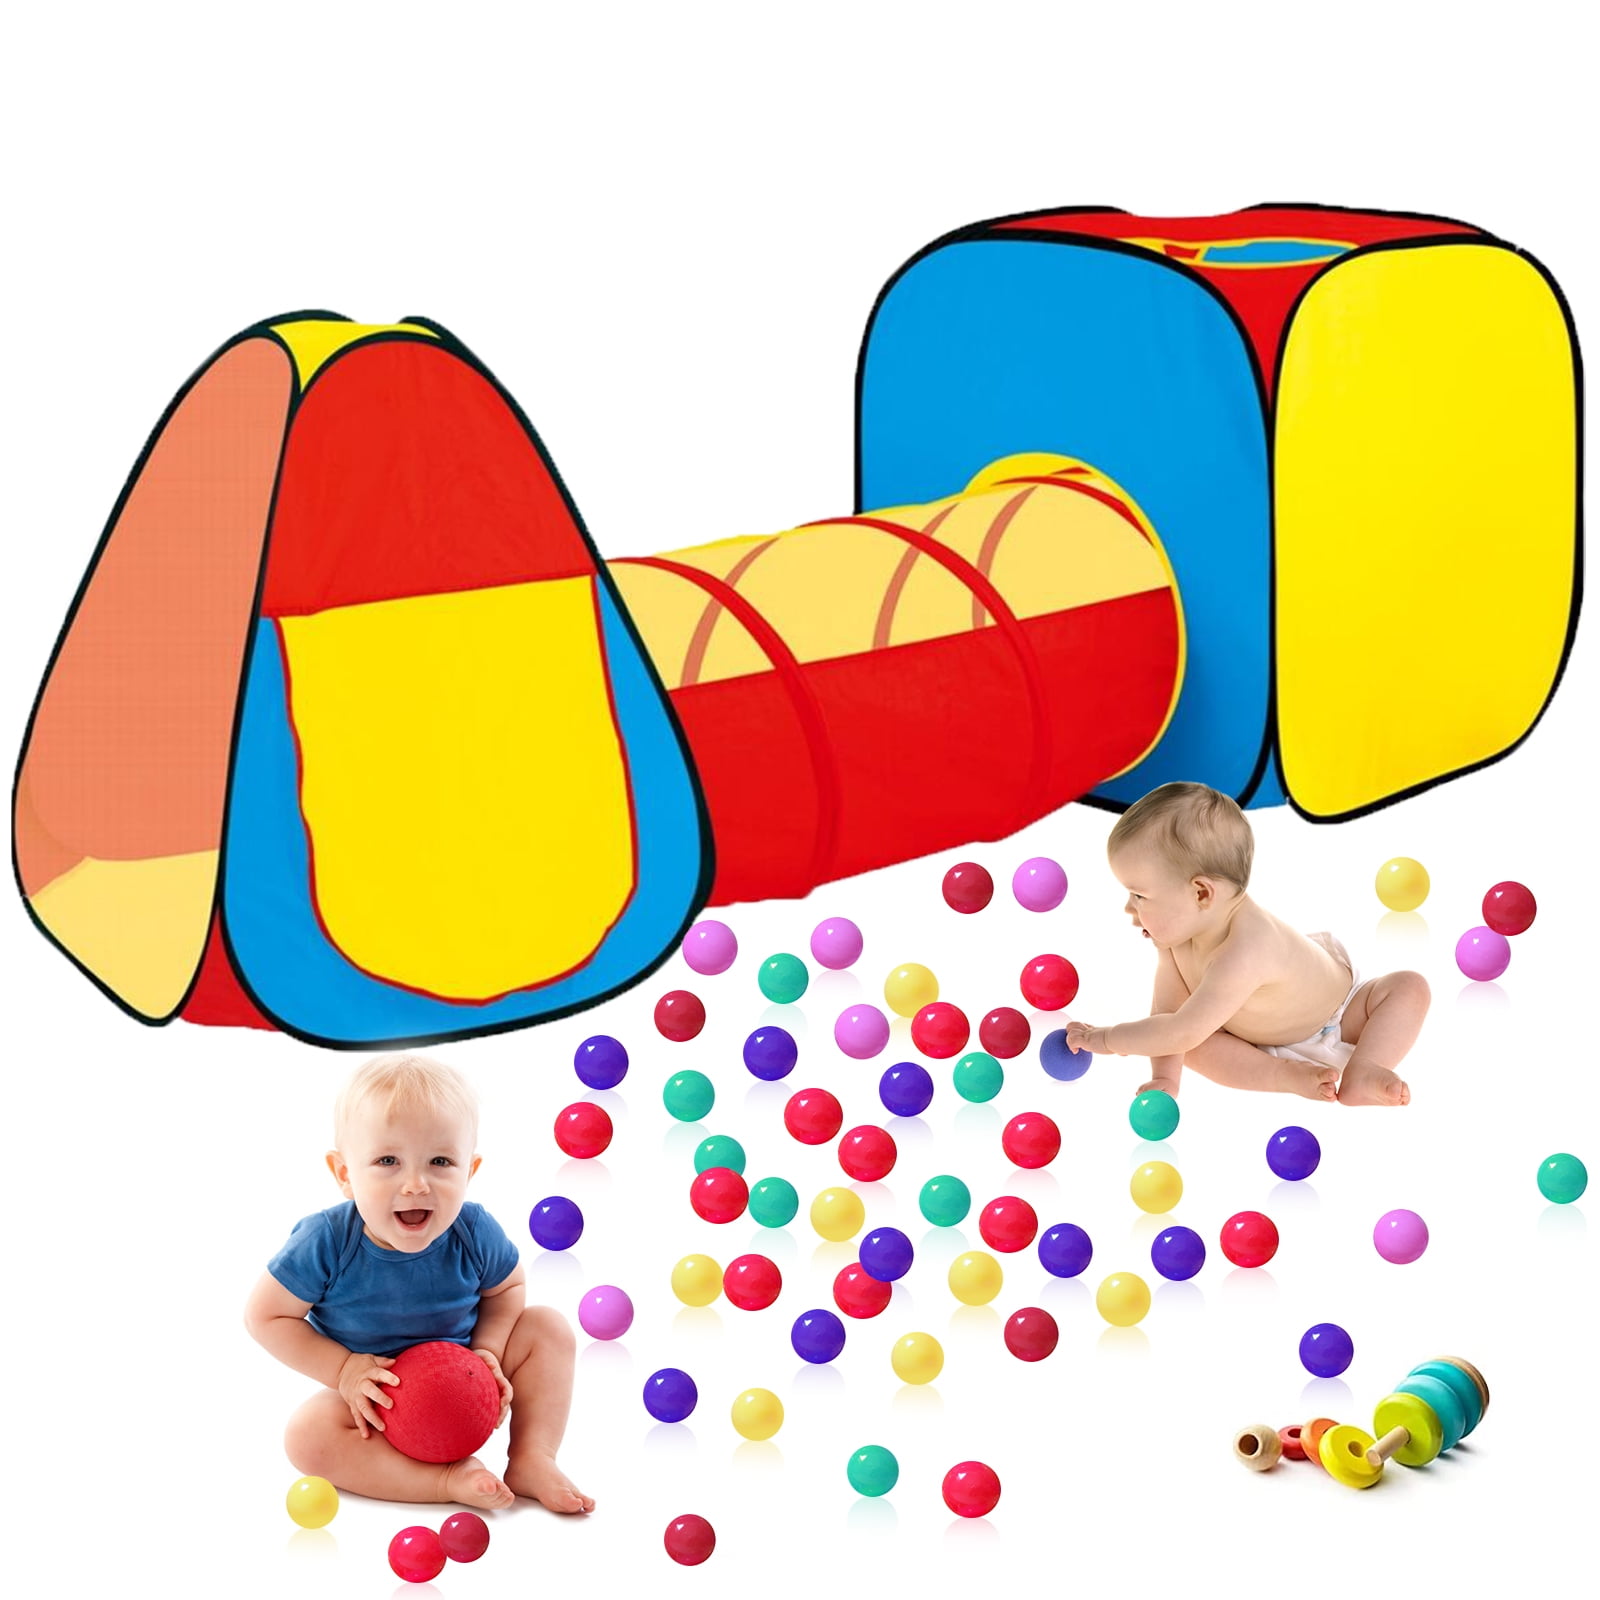 Details about   3 In 1 Kids Pop Up Play Tent Playhouse Crawl Camo Tunnel Ball Pit Toy Games 